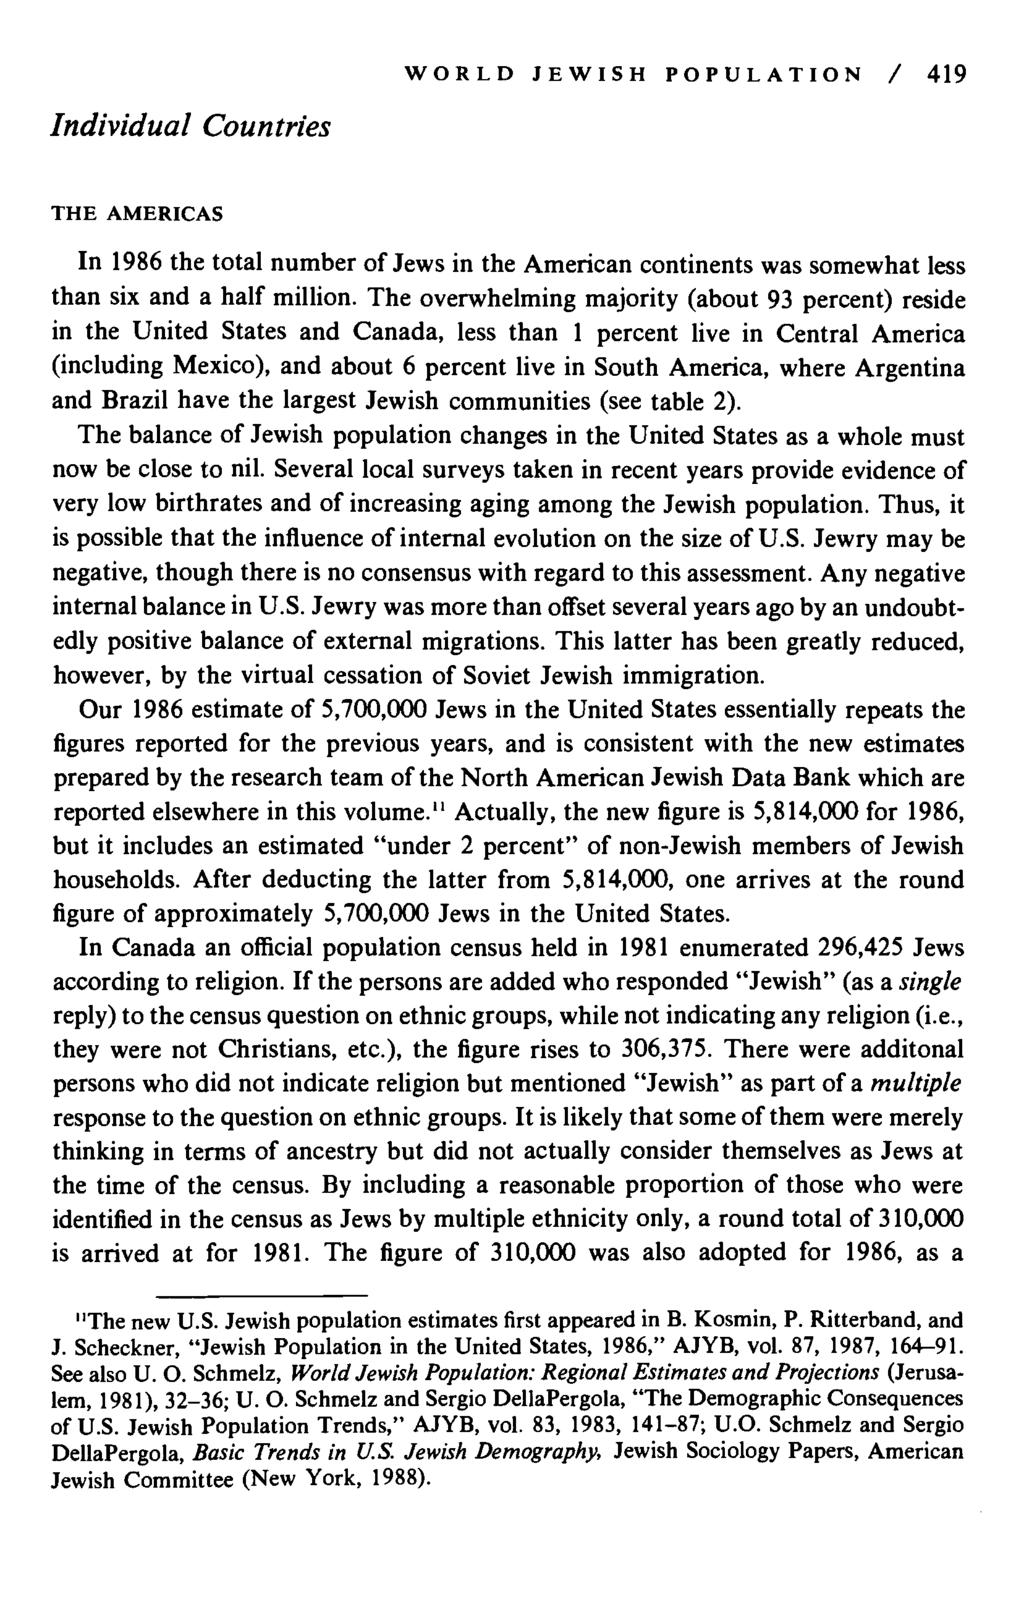 Individual ountries WORL JEWISH POPULATION / 419 THE AMERIAS In the total number of Jews in the American continents was somewhat less than six and a half million.